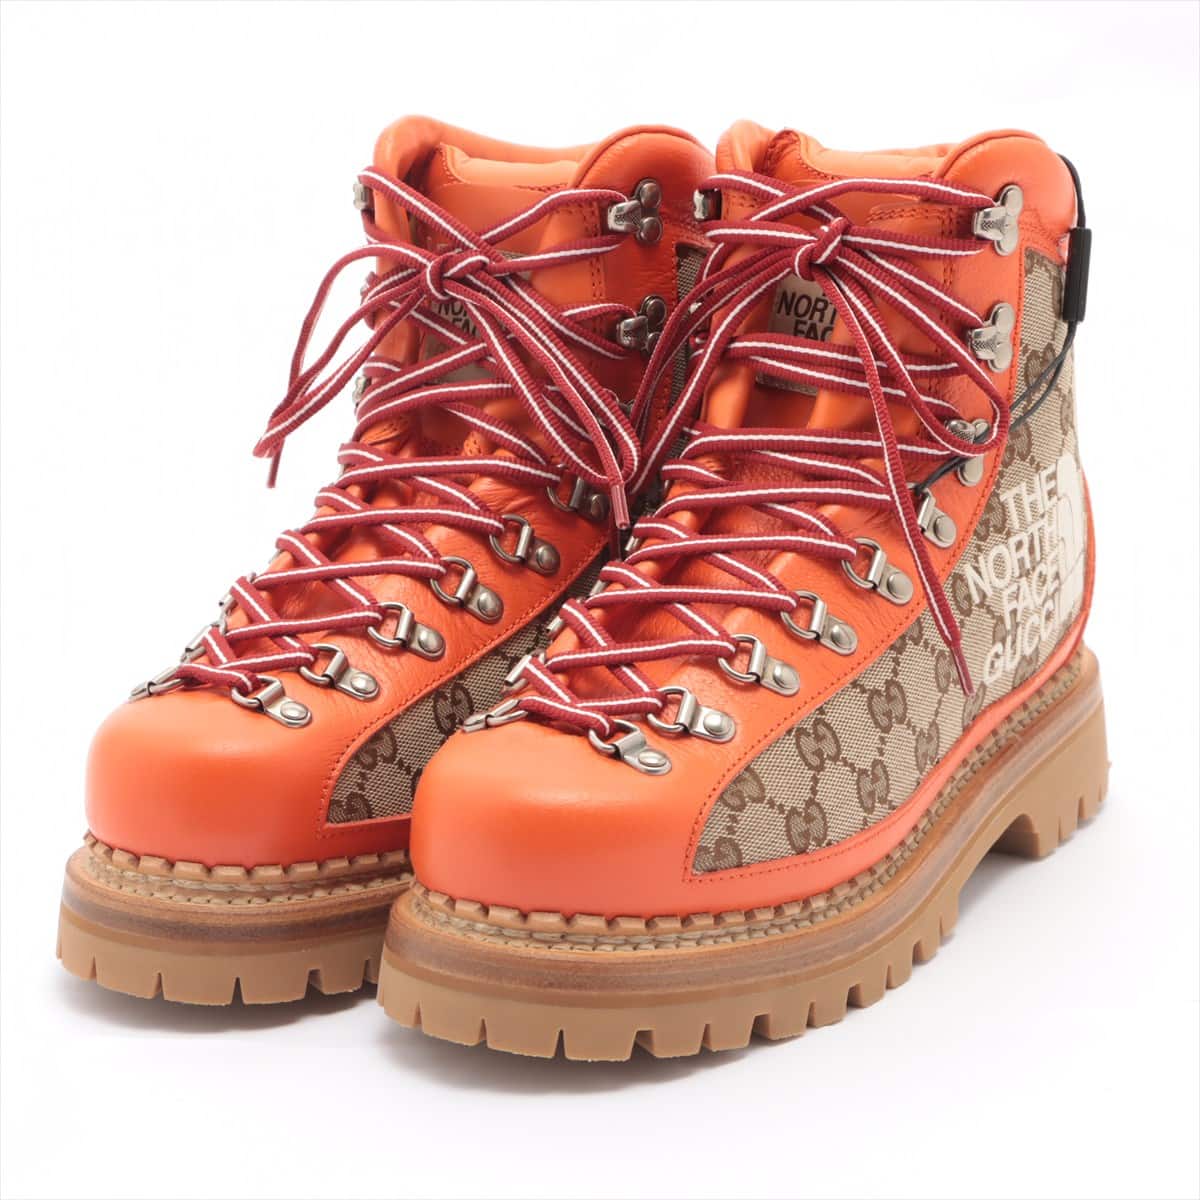 Gucci x North Face GG Supreme 22 years Canvas & leather Boots 6 Men's Brown x orange 679914